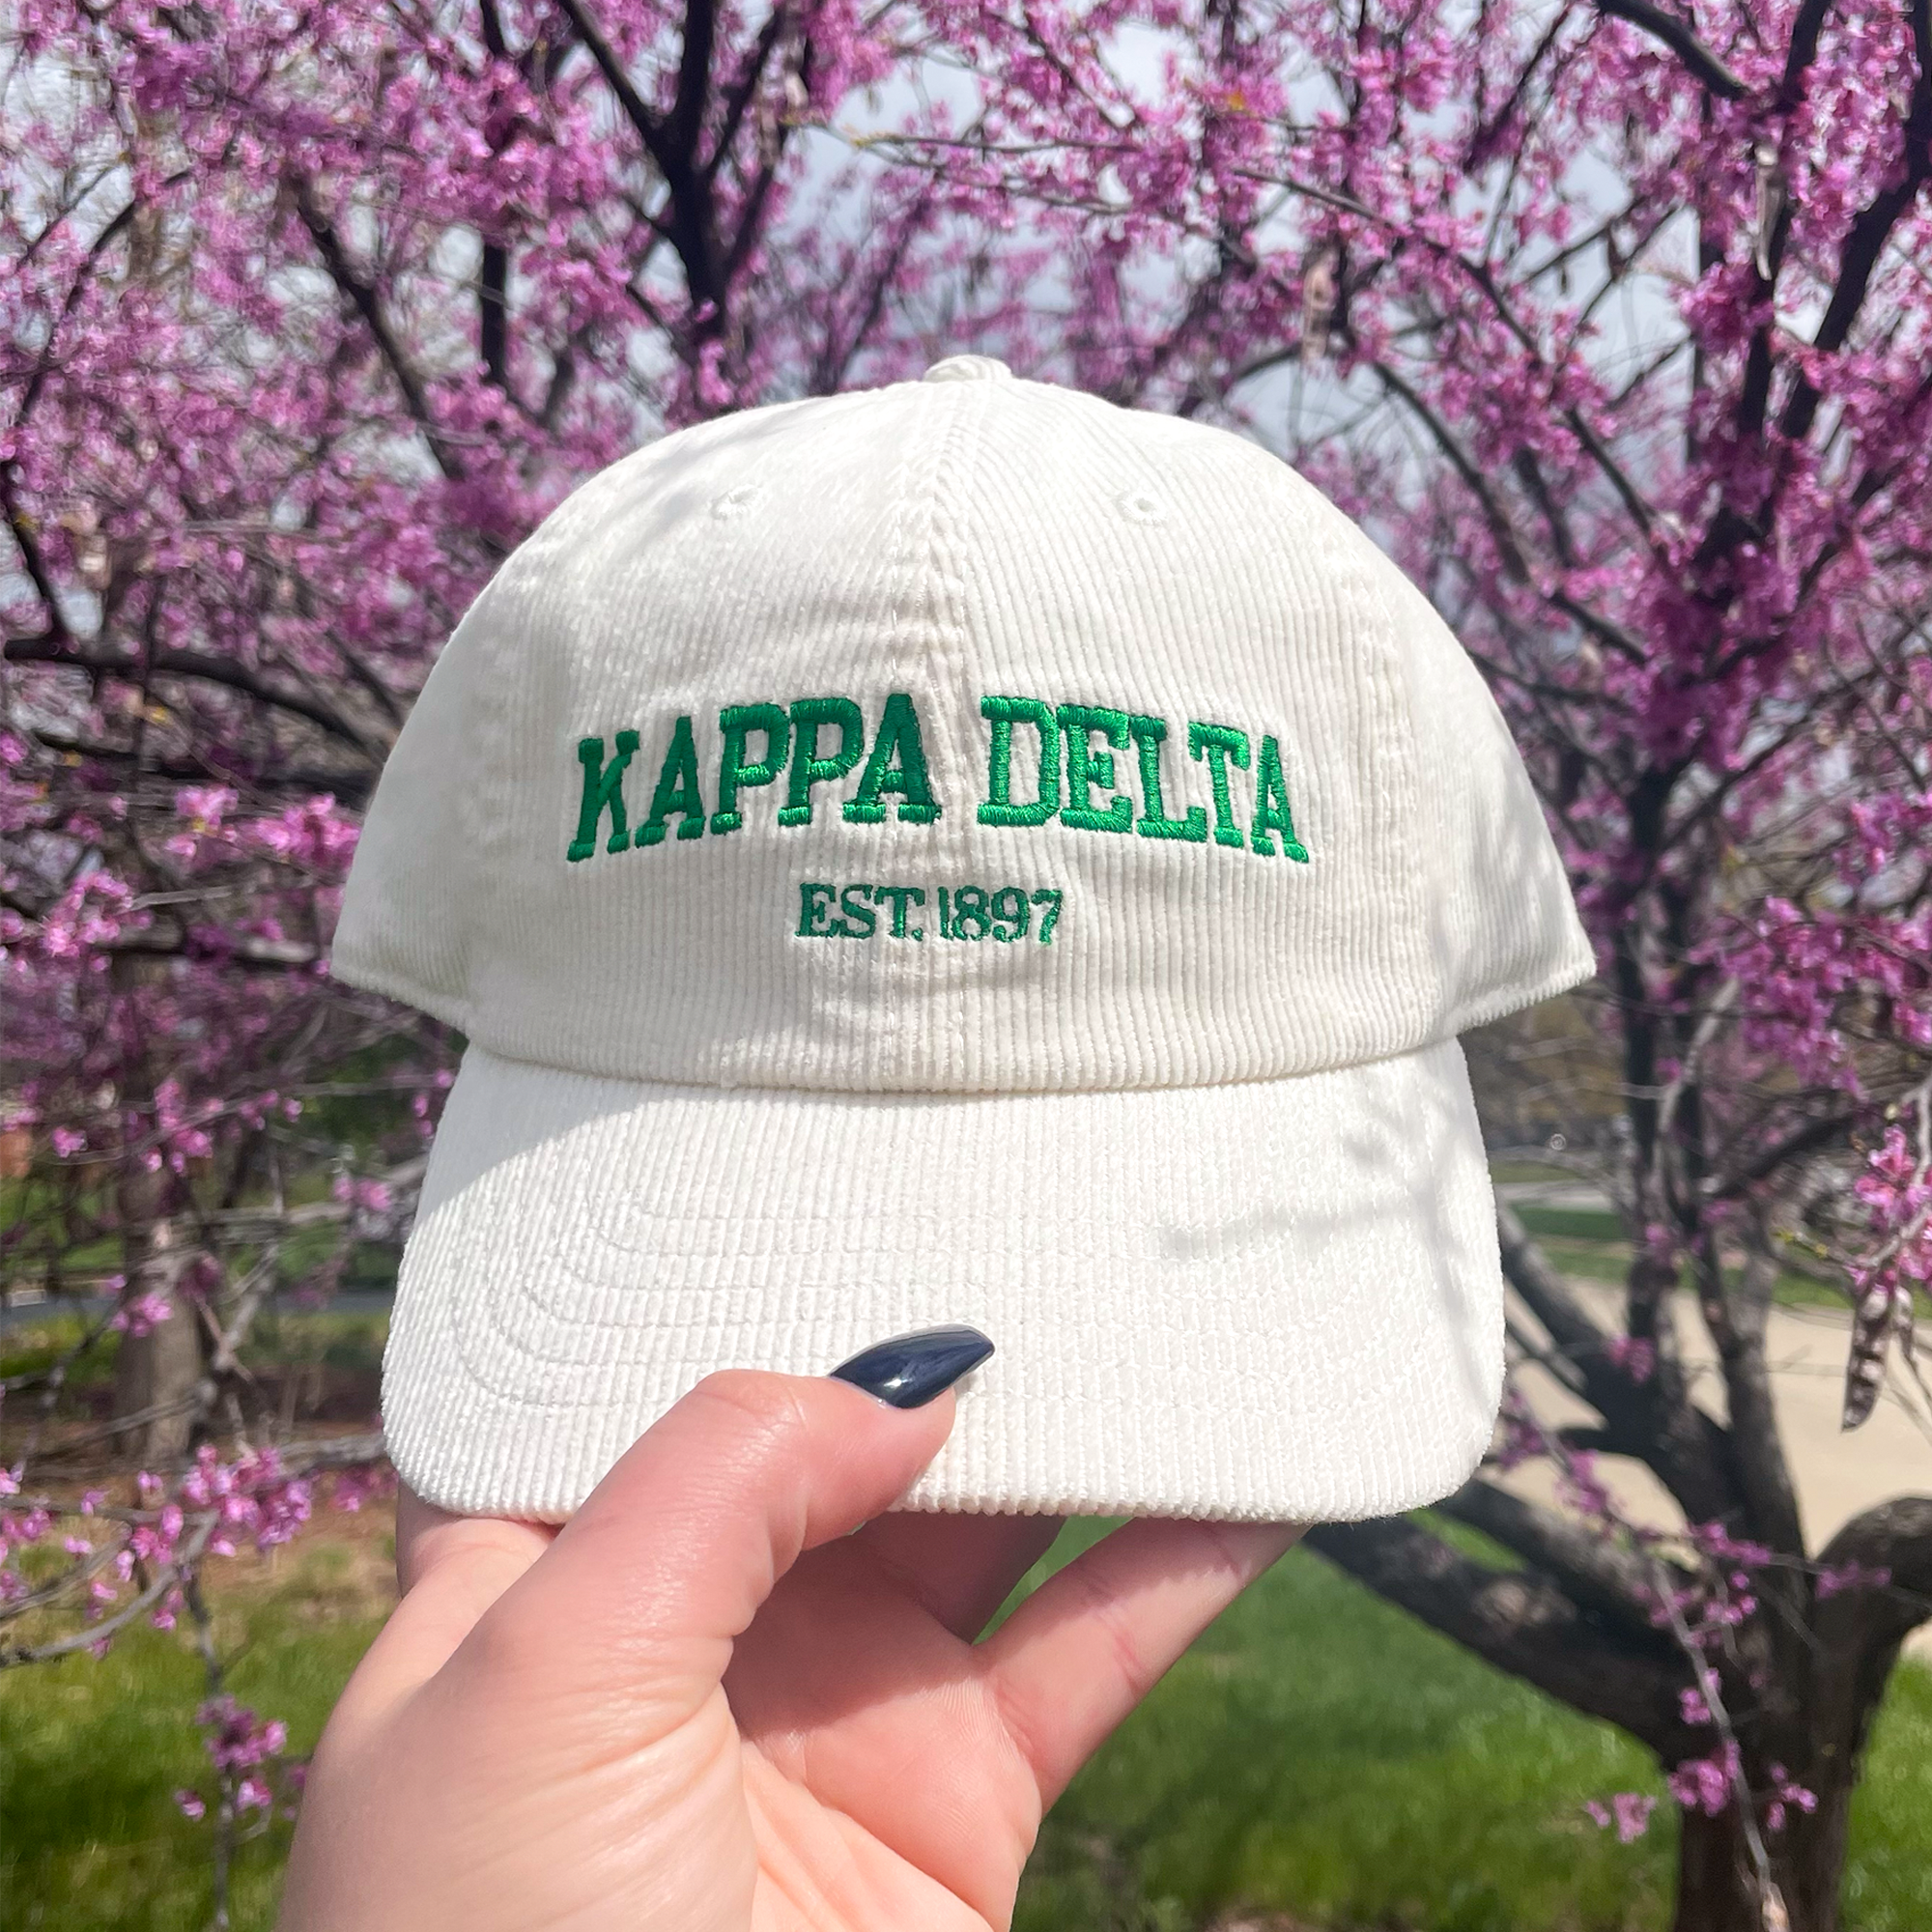 a person holding up a white hat with the words kapa delta on it